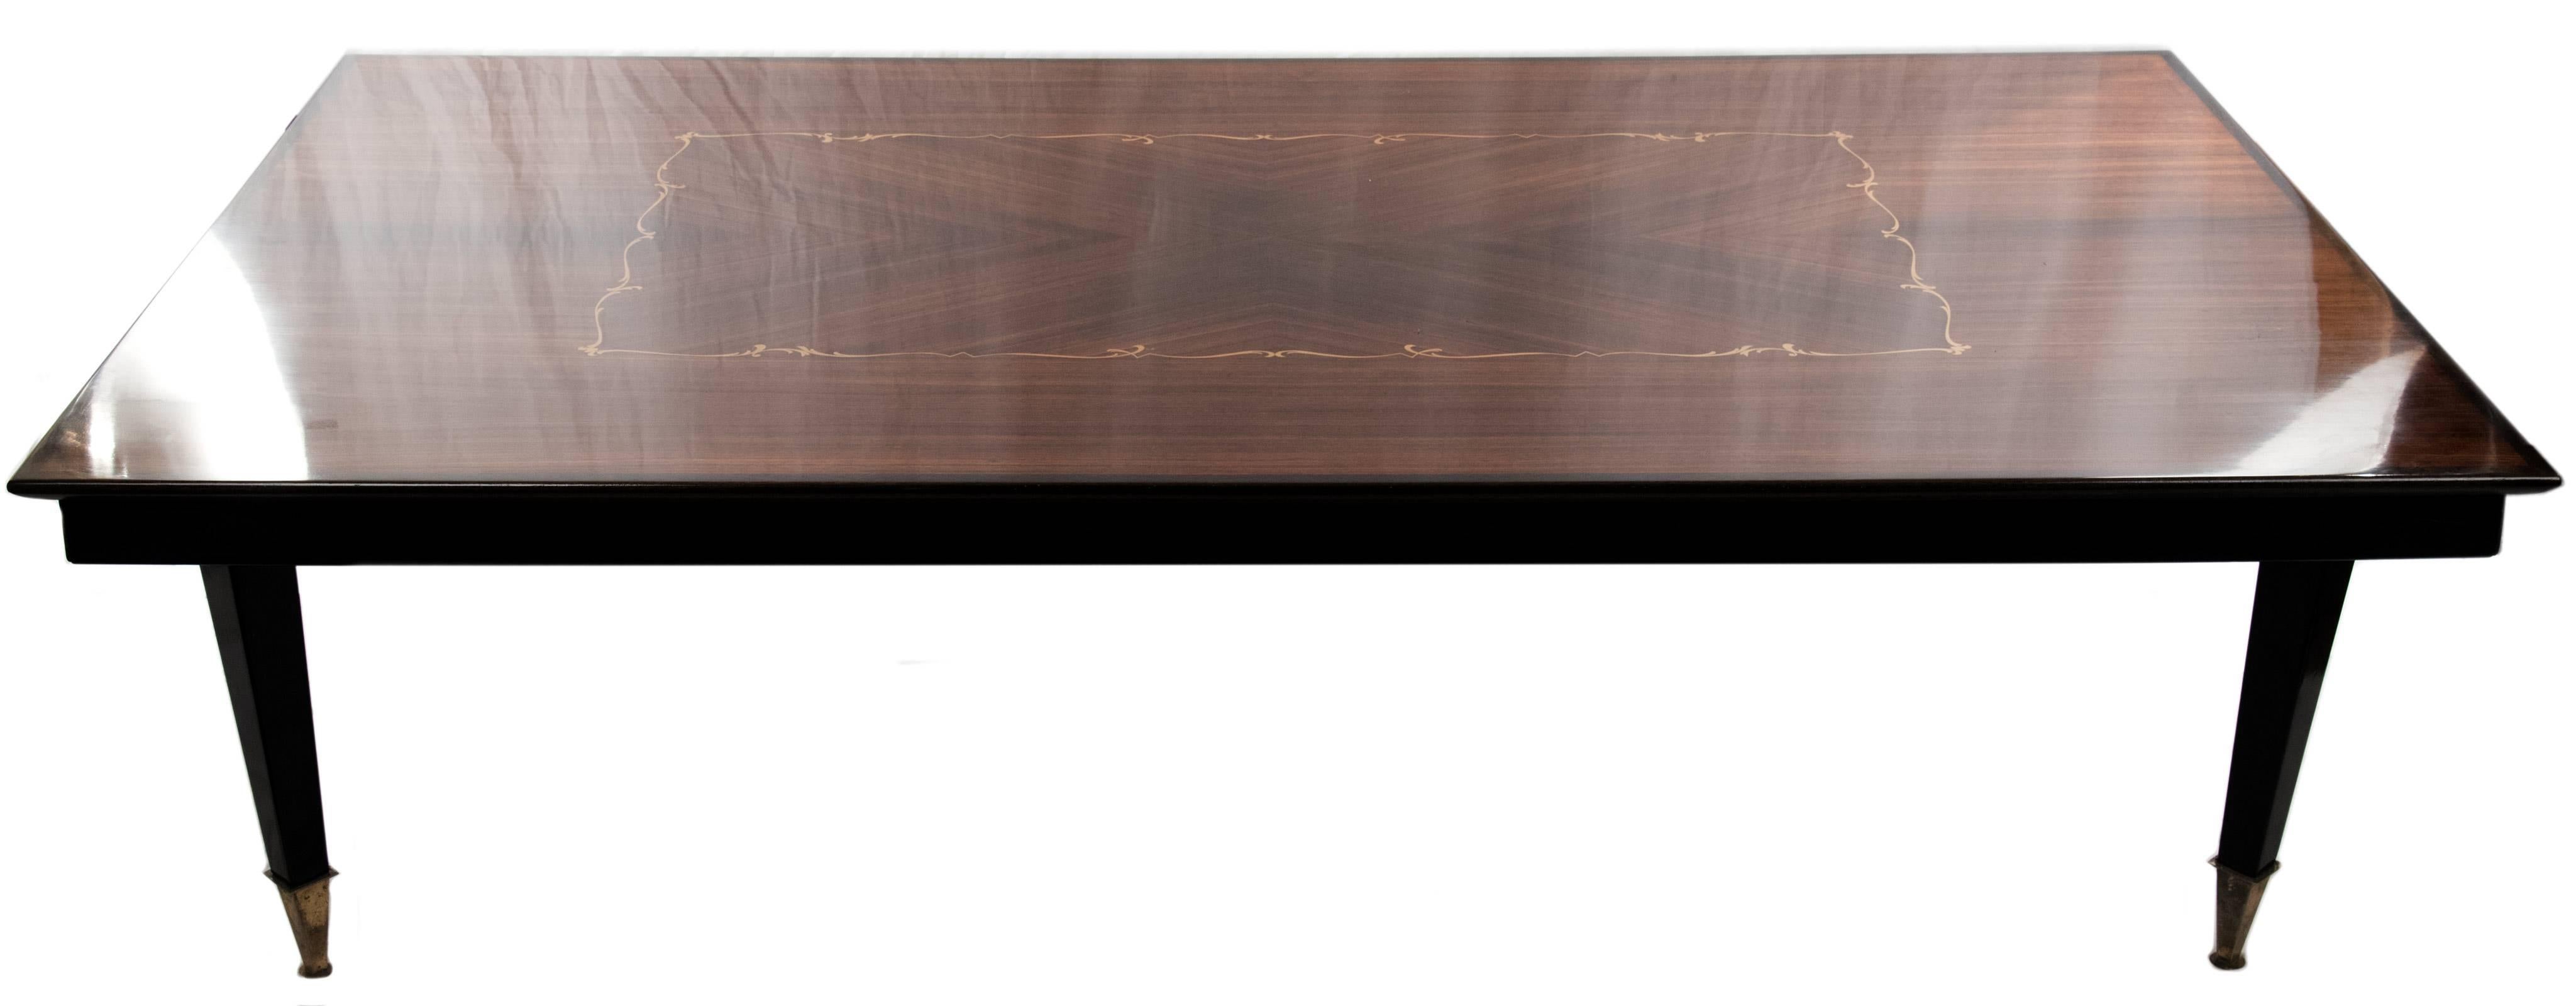 20th Century Walnut Coffee Table with Marquetry Inlay For Sale